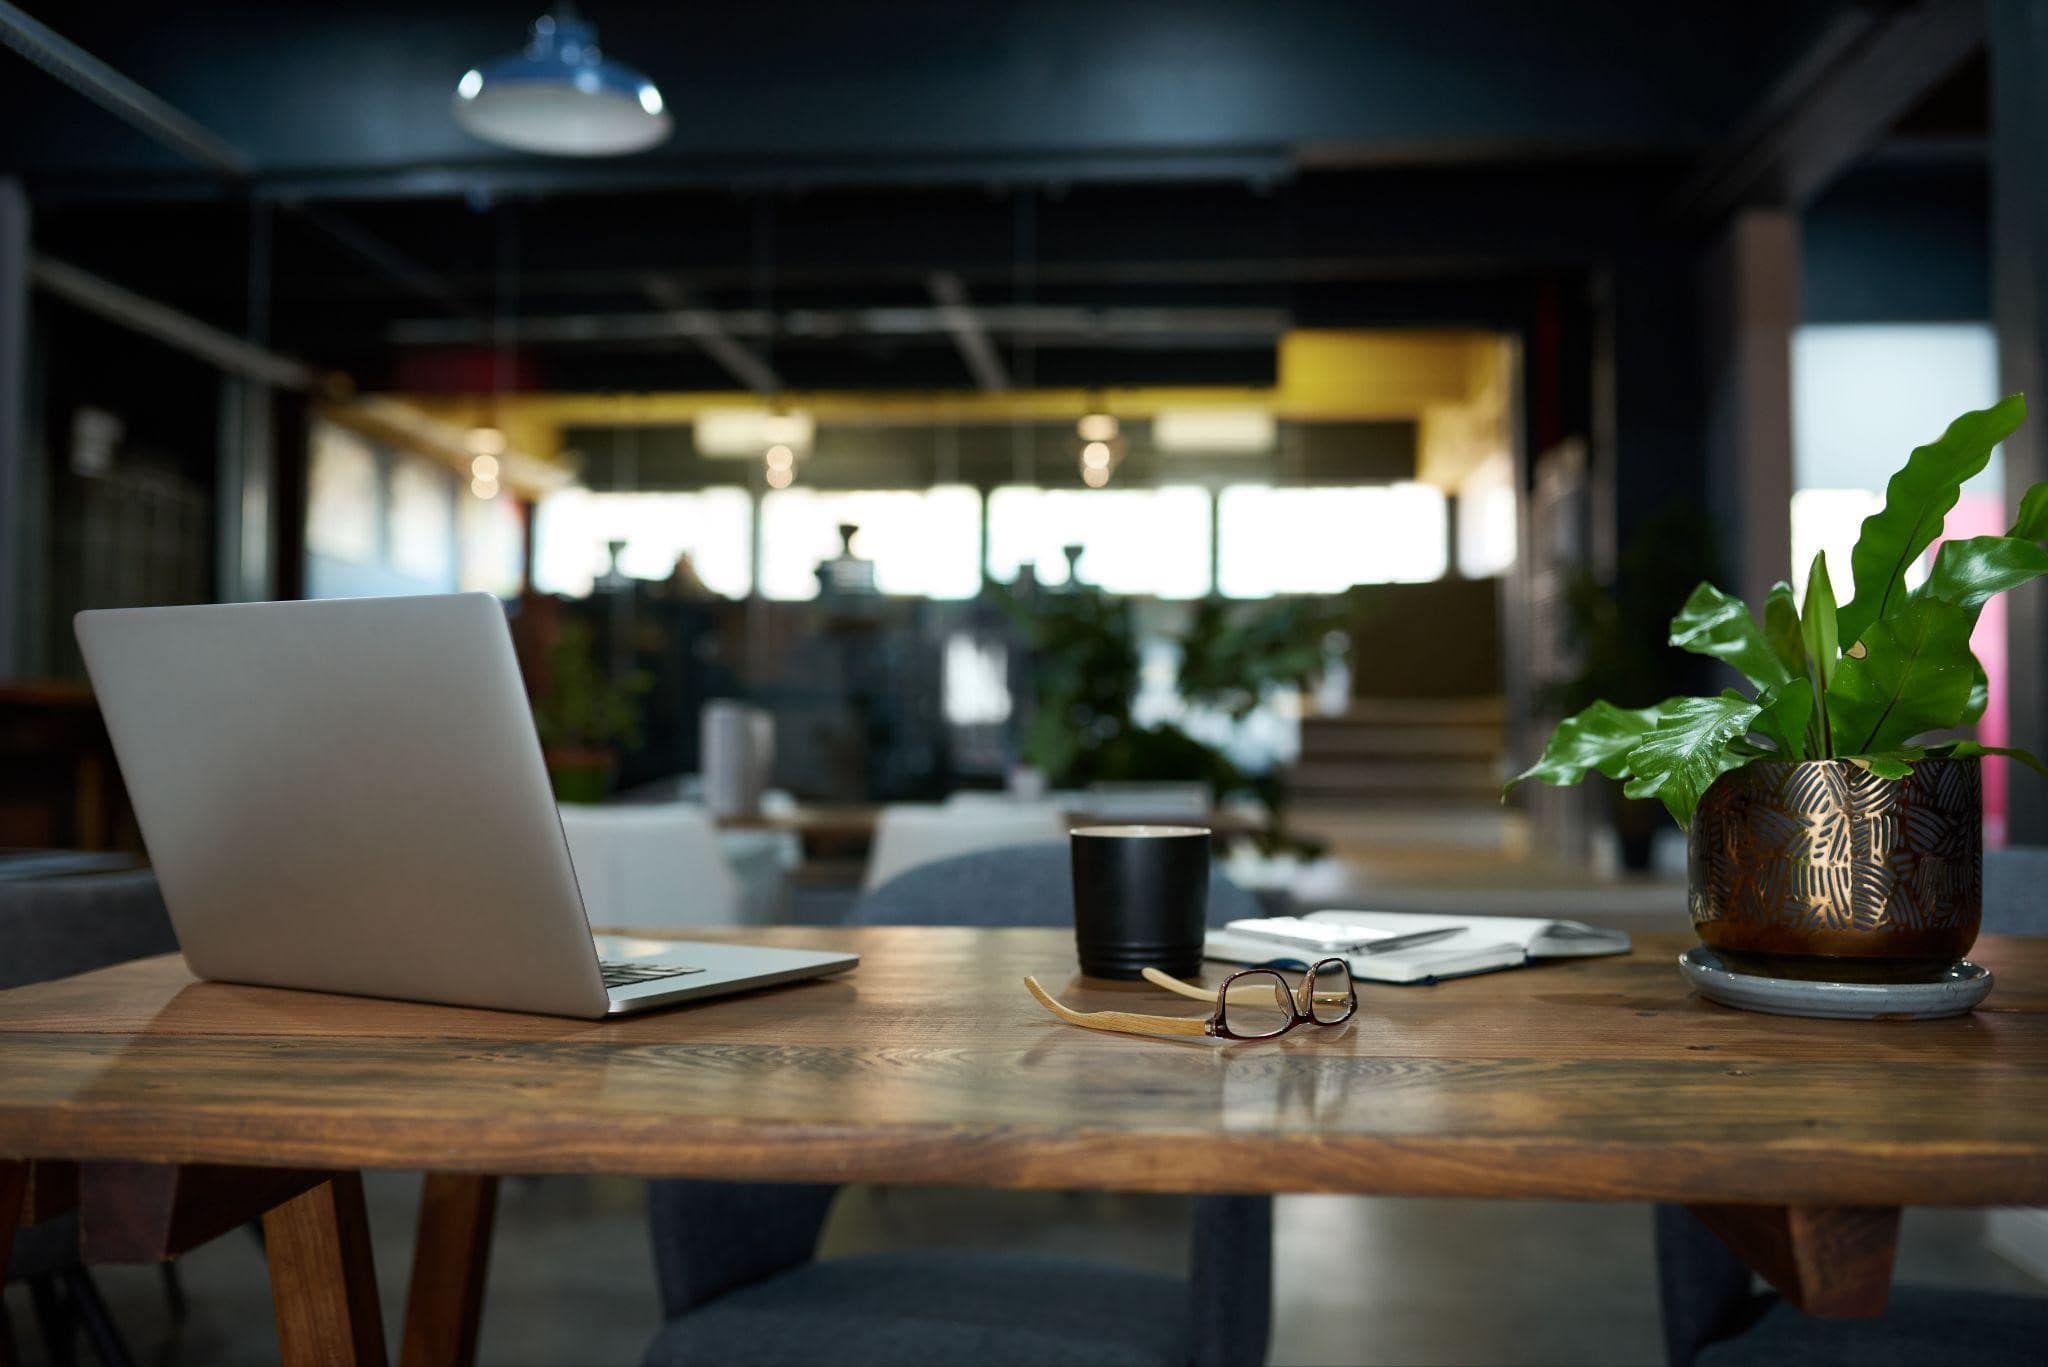 Coworking Spaces Vs. Coffee Shops What’s More Flexible For You